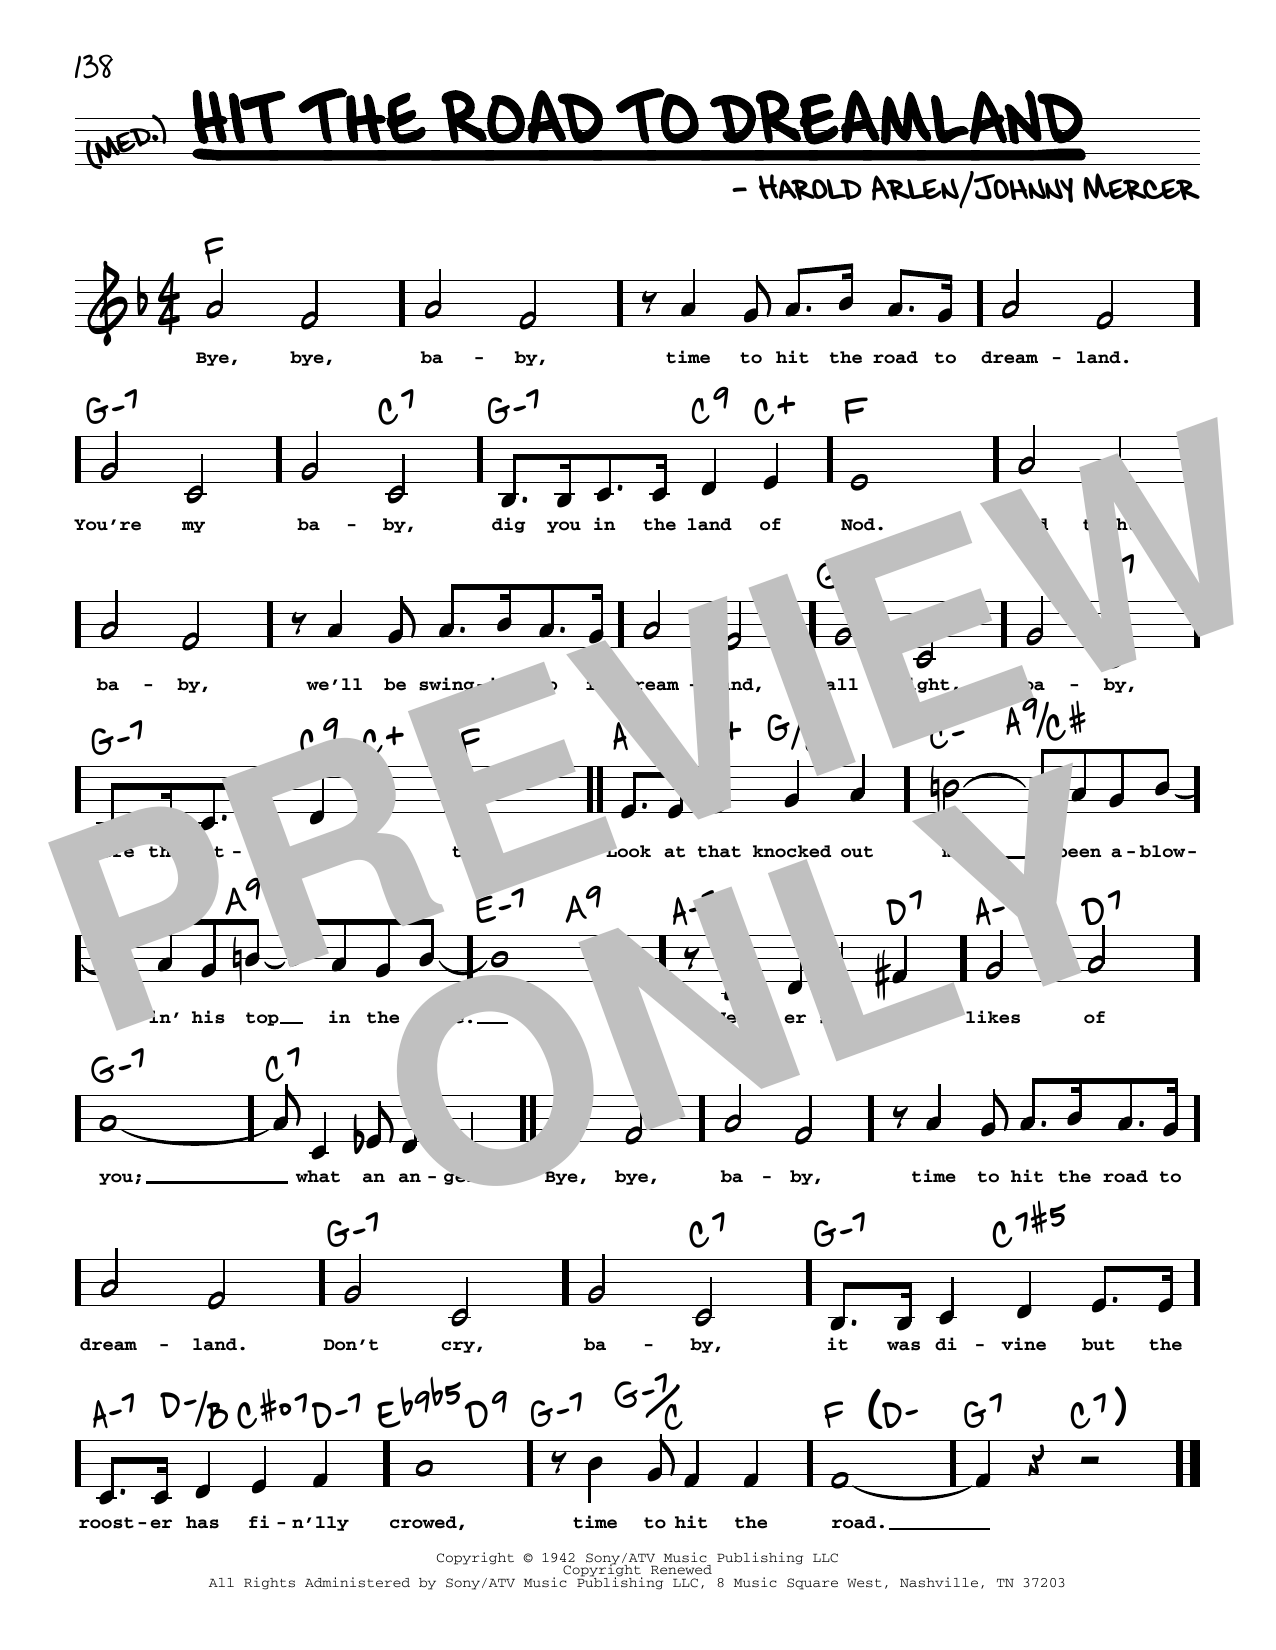 Johnny Mercer Hit The Road To Dreamland (Low Voice) sheet music notes printable PDF score